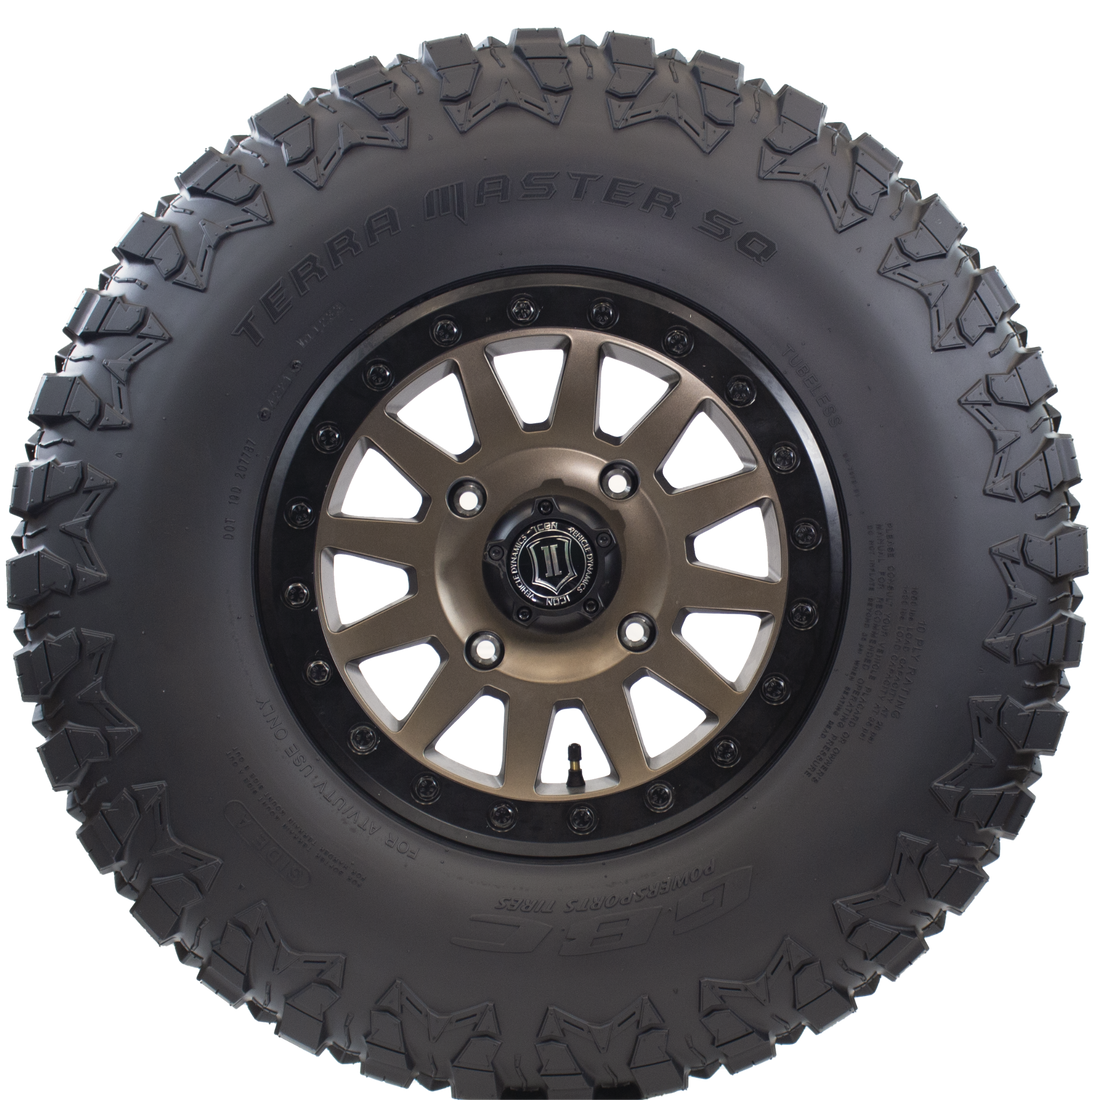 Side view of Terra Master SQ UTV tire, revealing the durable sidewall and aggressive shoulder lugs that ensure stability and control in challenging terrains, making it a reliable companion for adventurous rides.